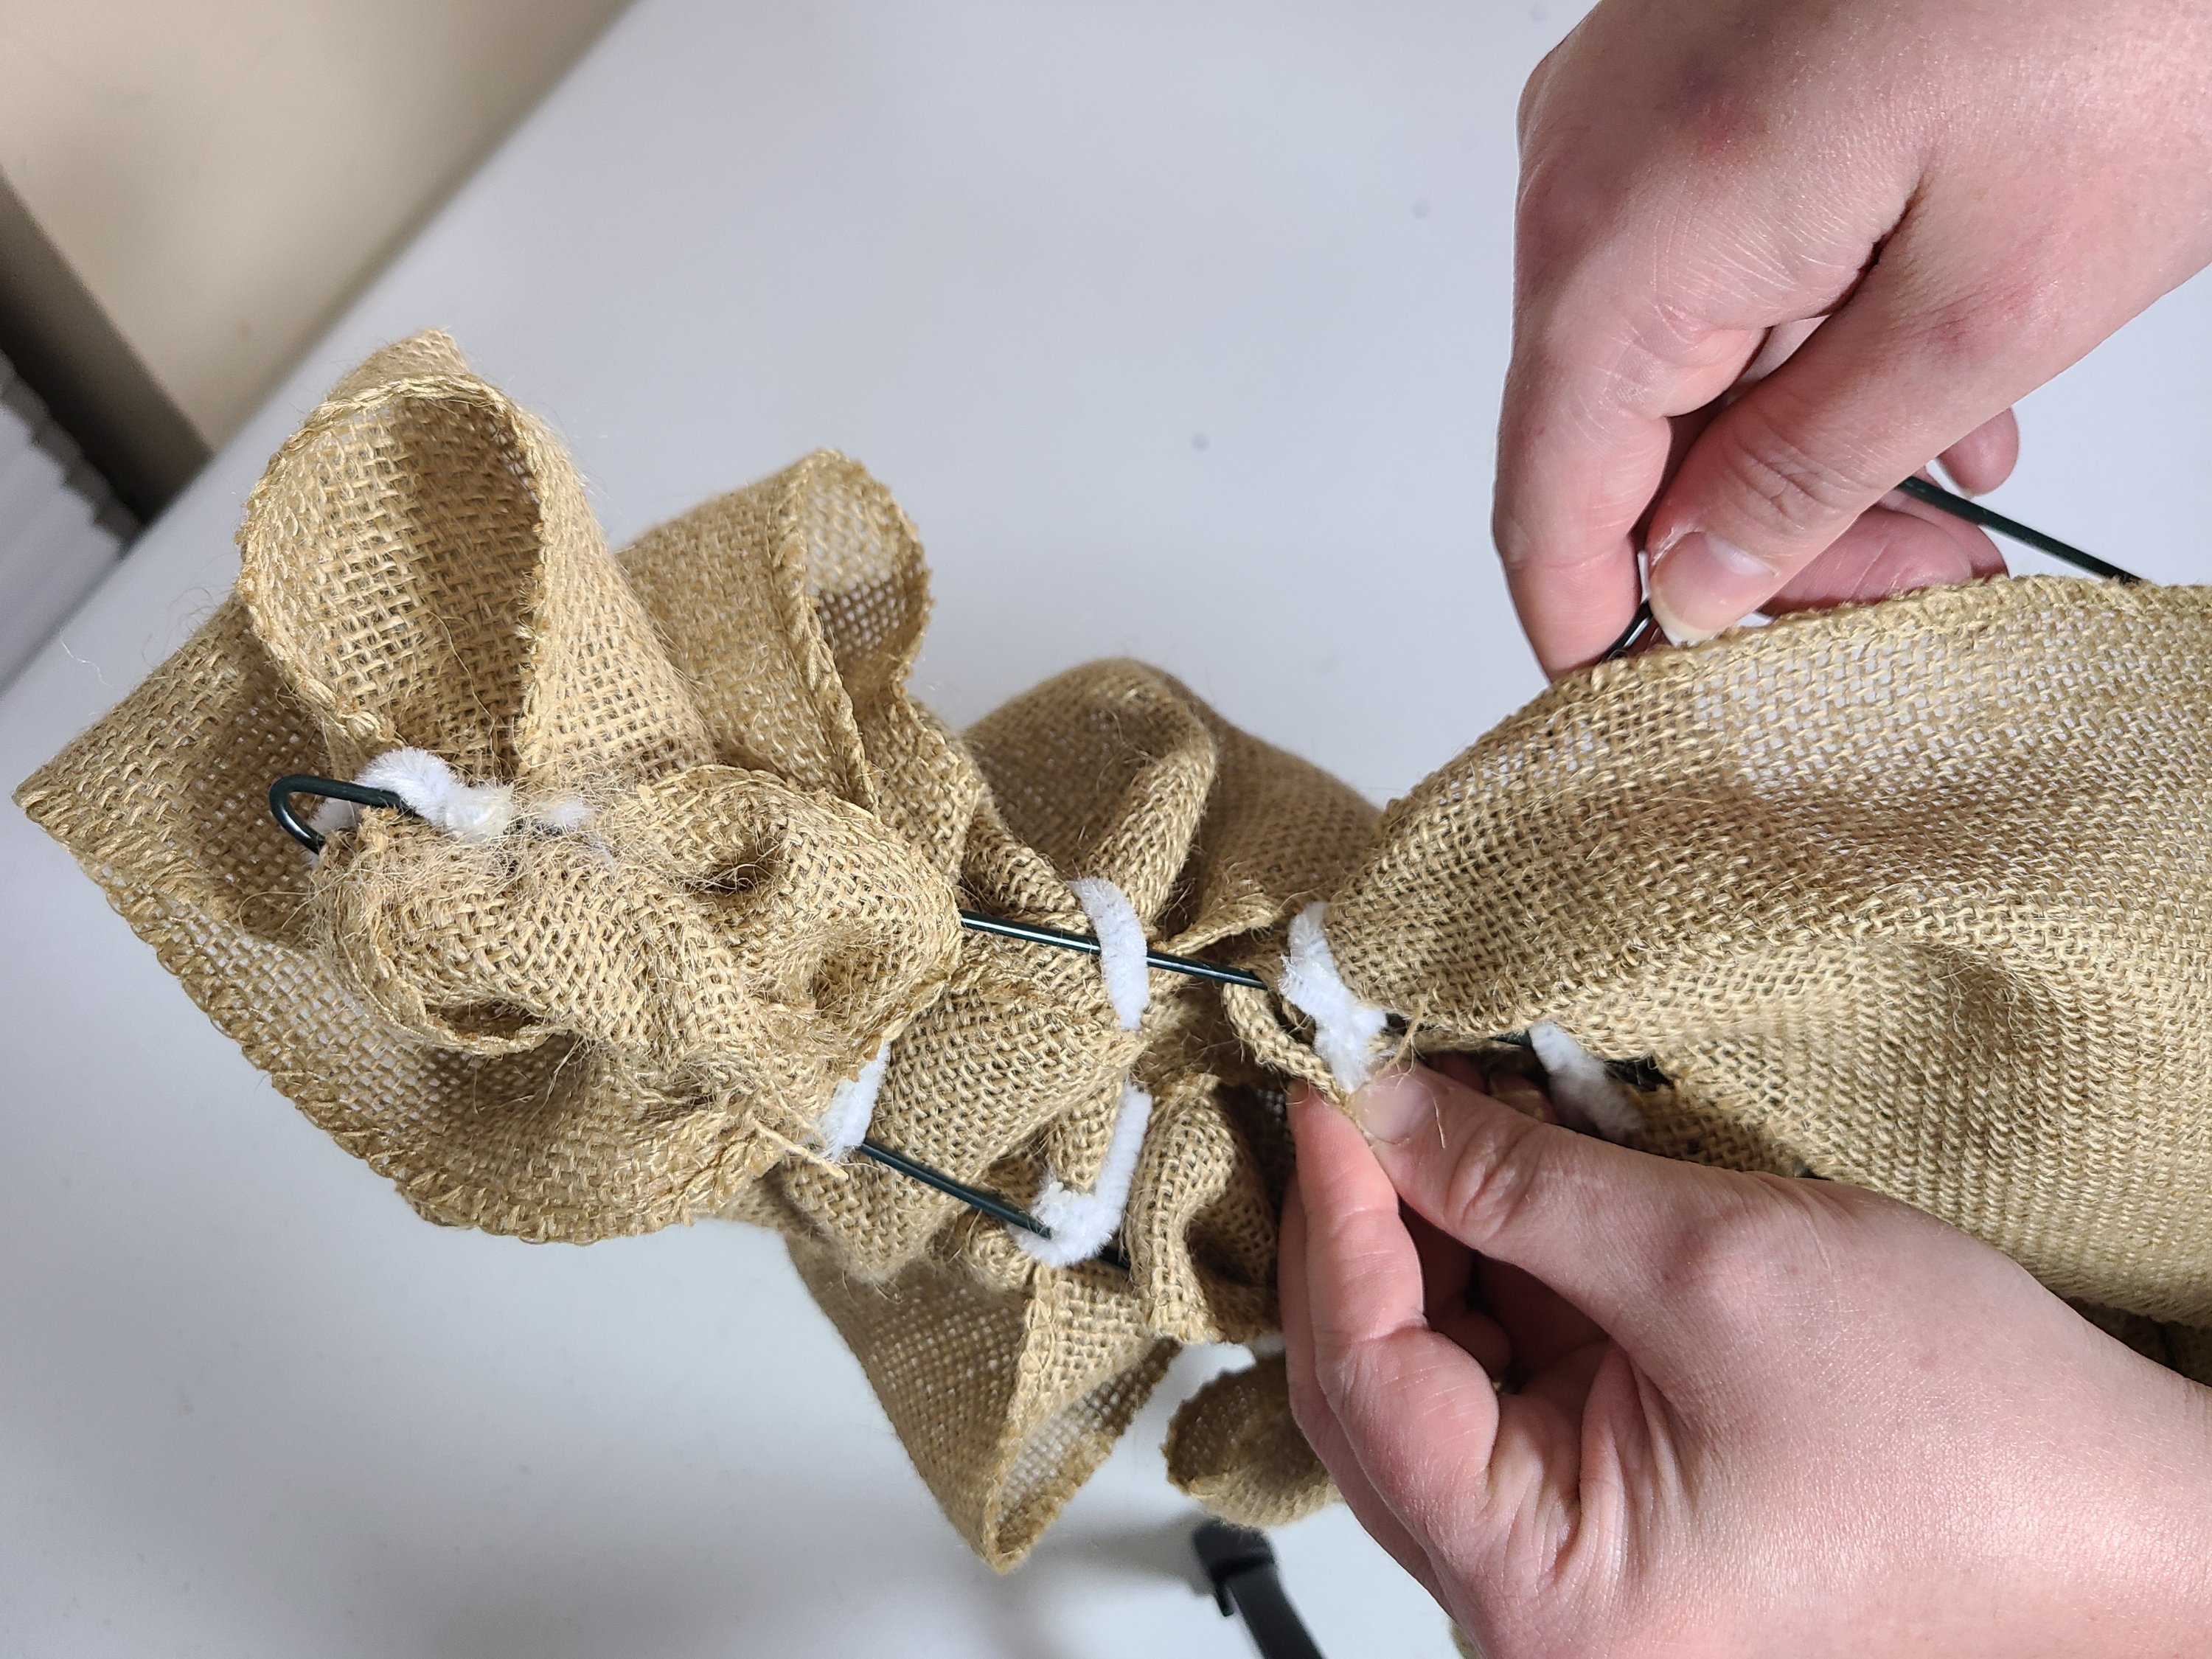 Showing how to attach the burlap to the brim of the burlap witch hat wreath. This is the back view.